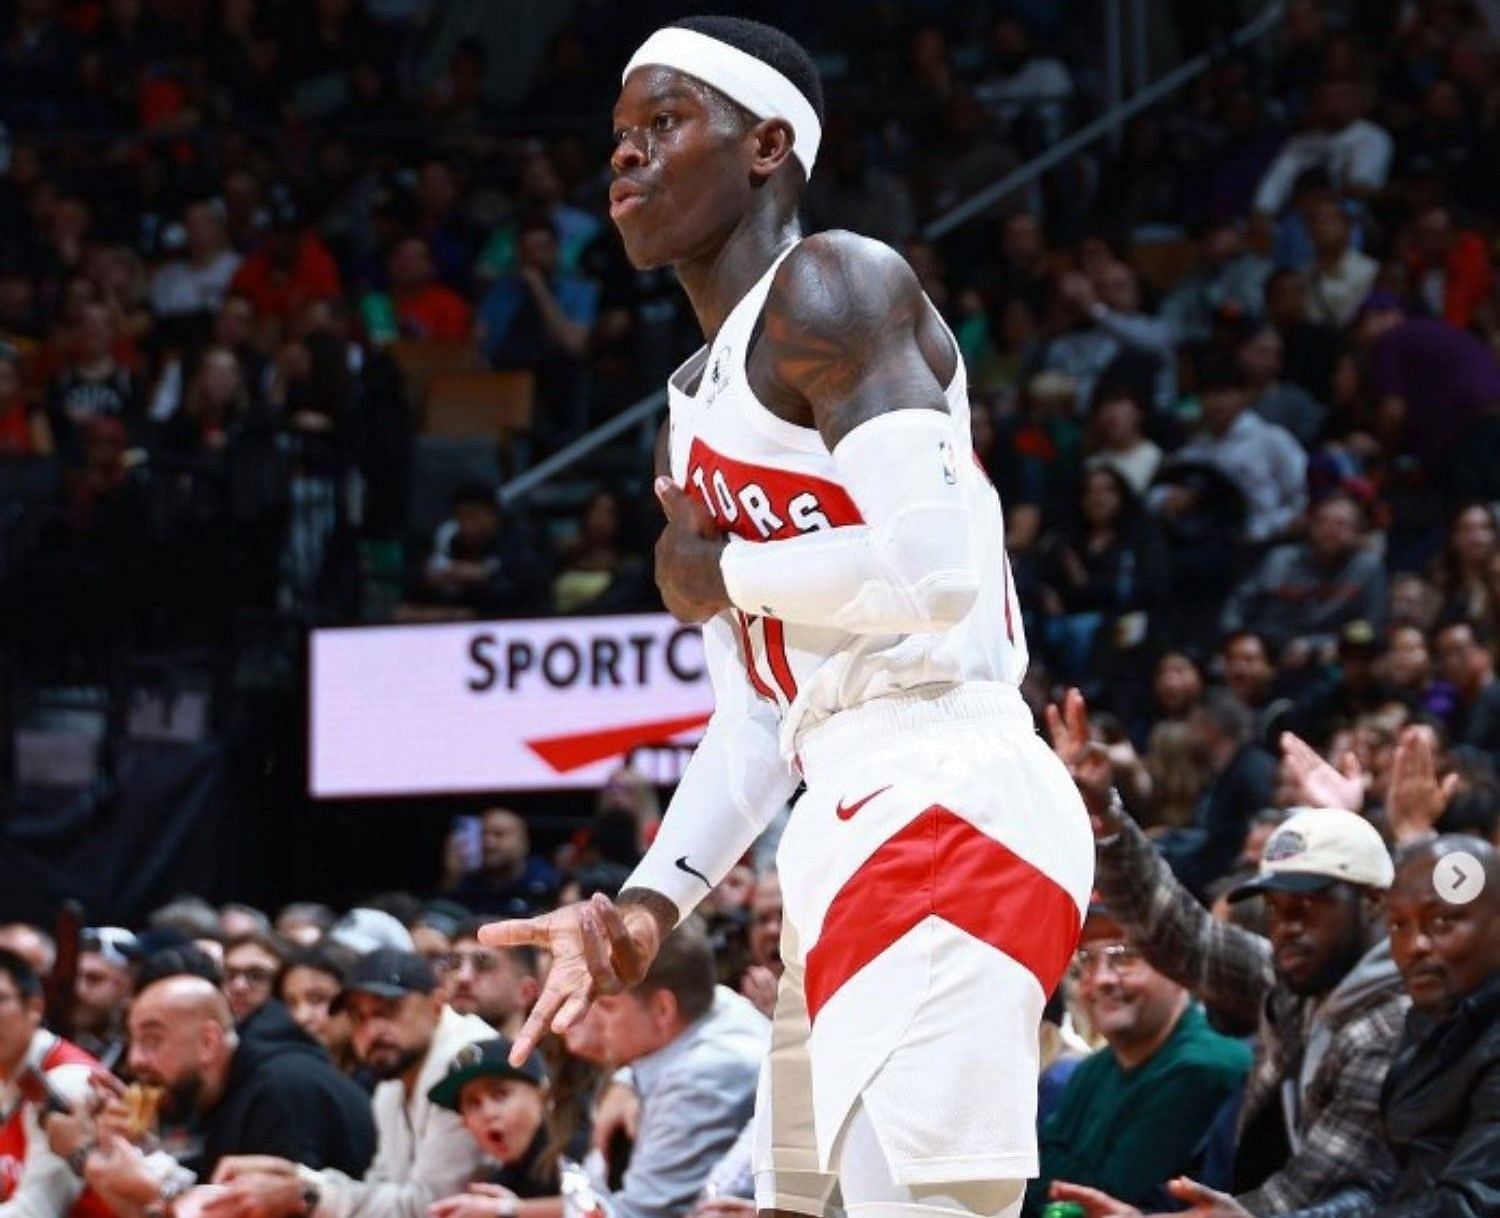 Dennis Schroder signed a two-year, $26-million contract with the Raptors in the offseason.